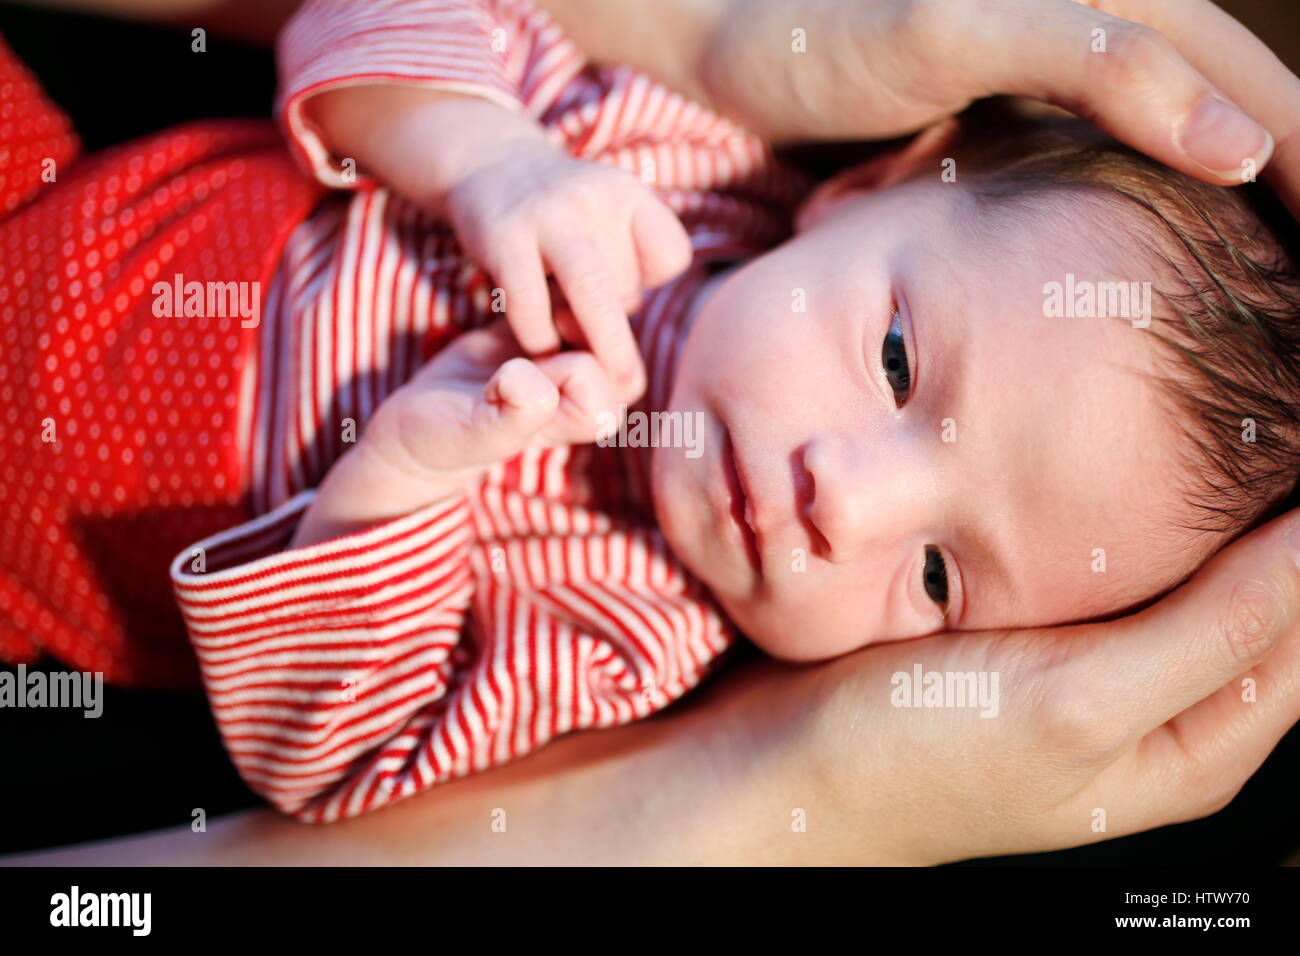 Detail 2 weeks old baby, hands of parents Stock Photo